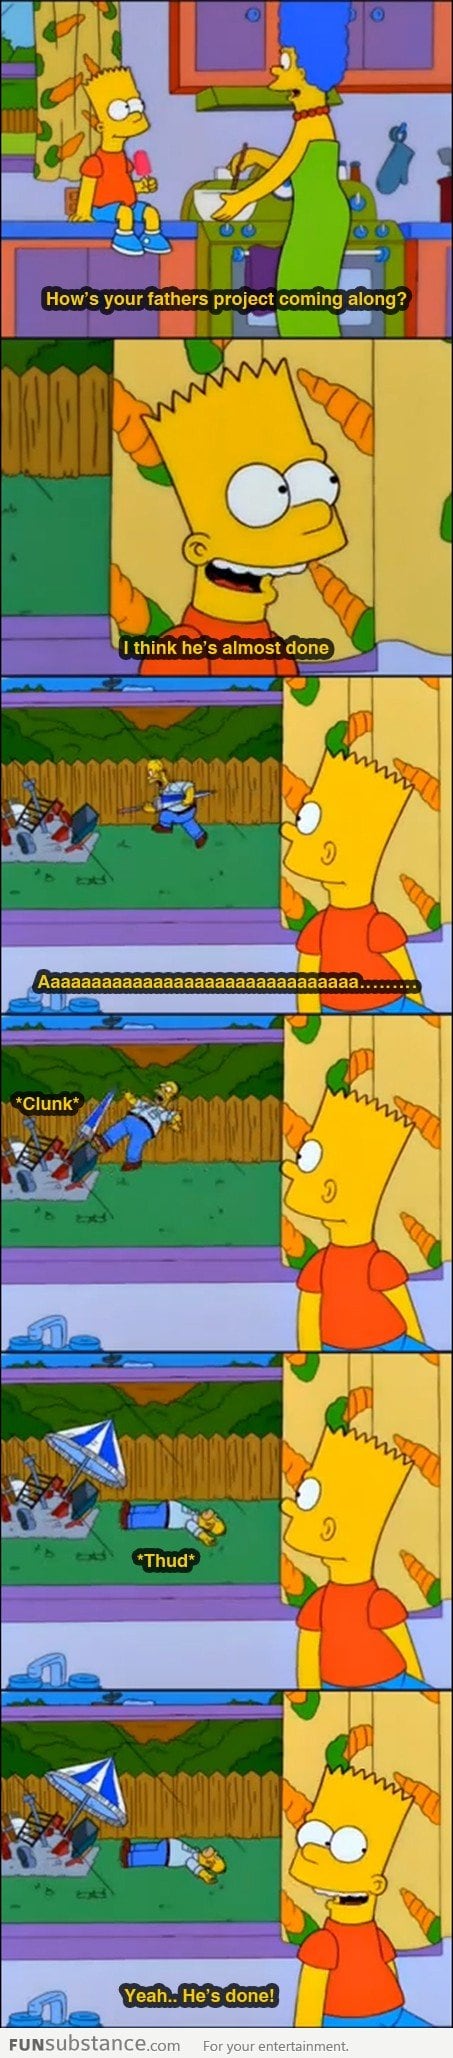 Homer's Project